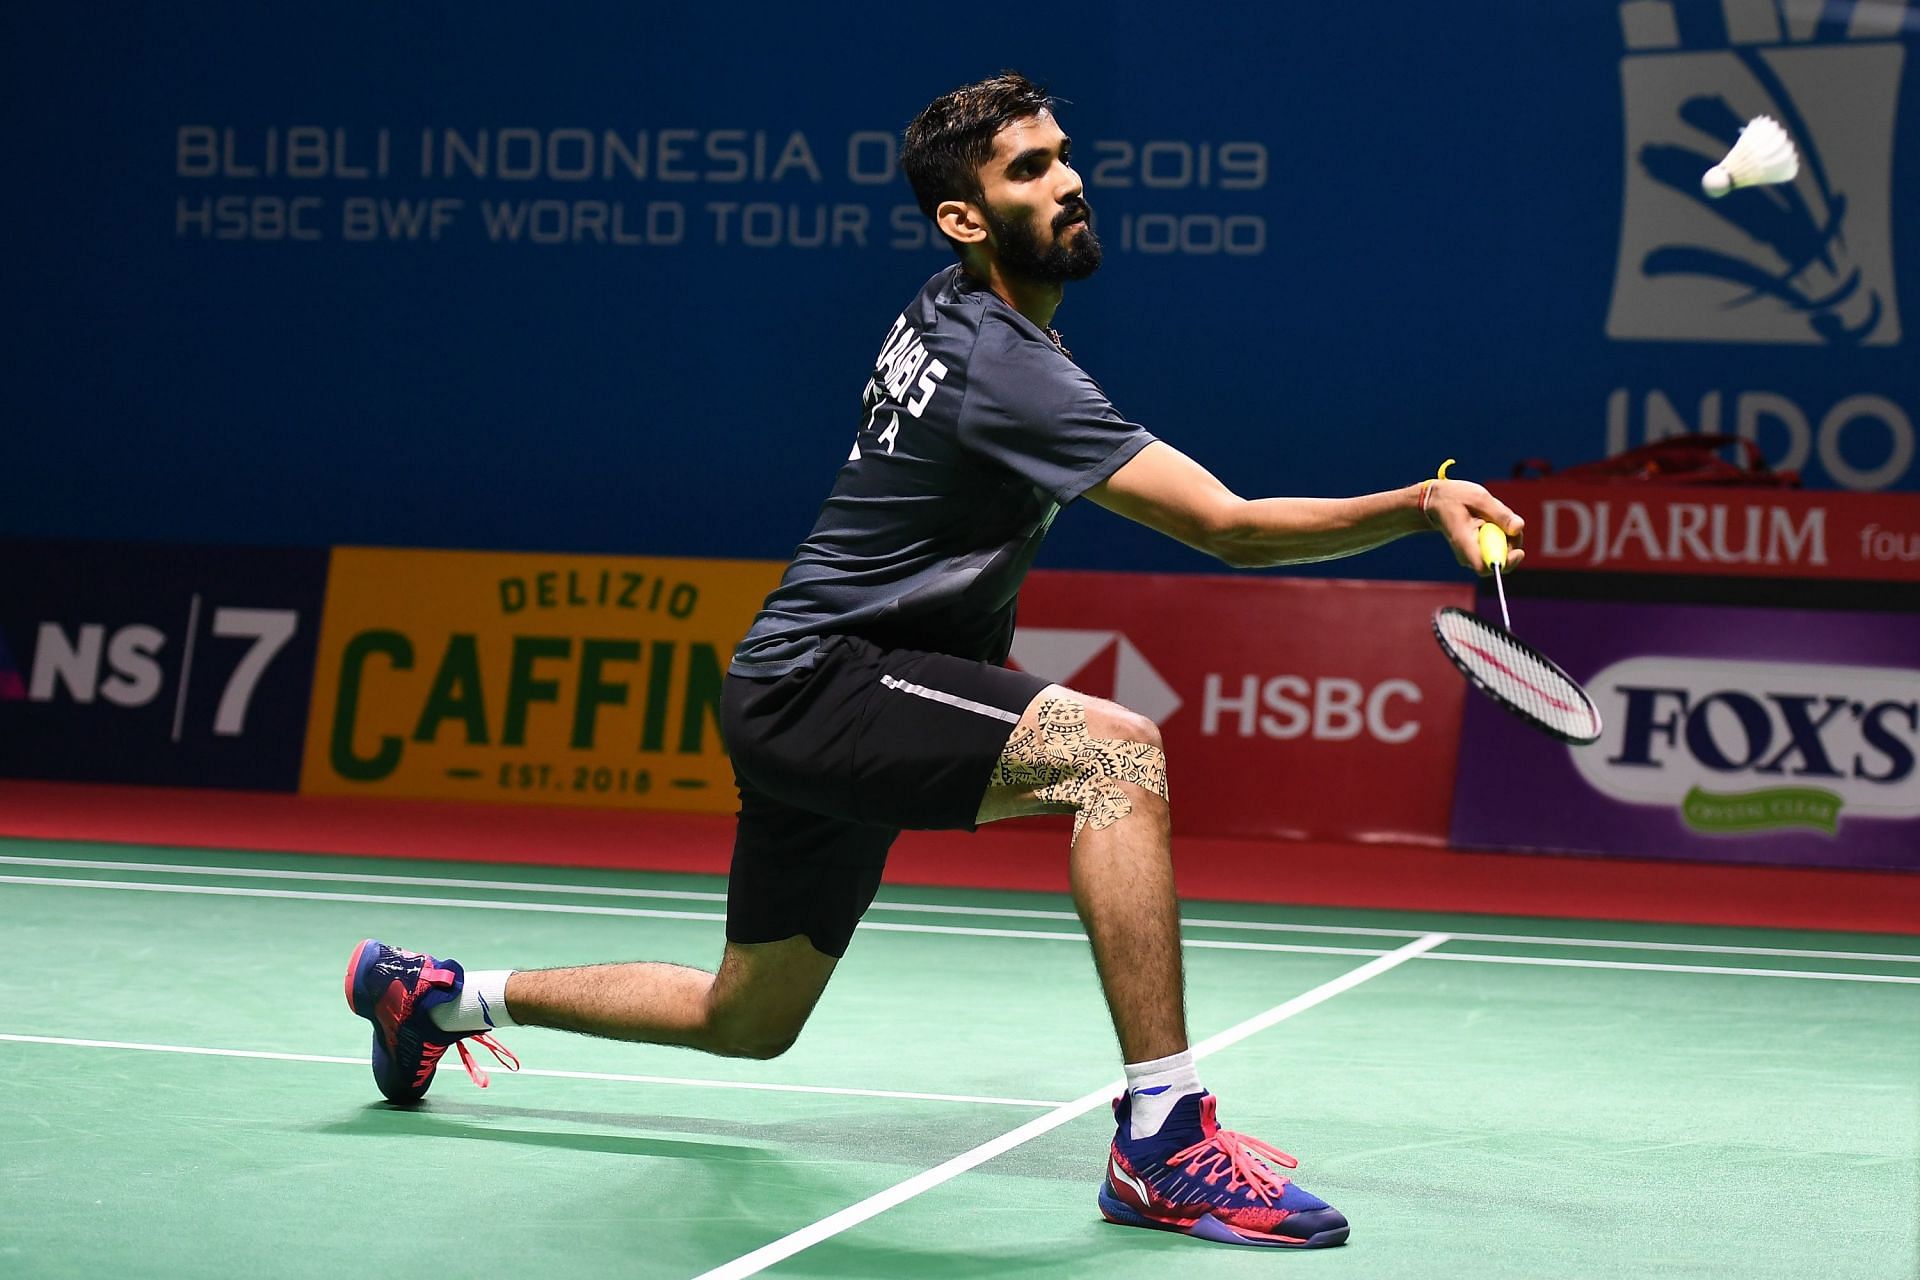 BWF World Championships 2021 Preview Where to watch, live stream details, TV schedule and more